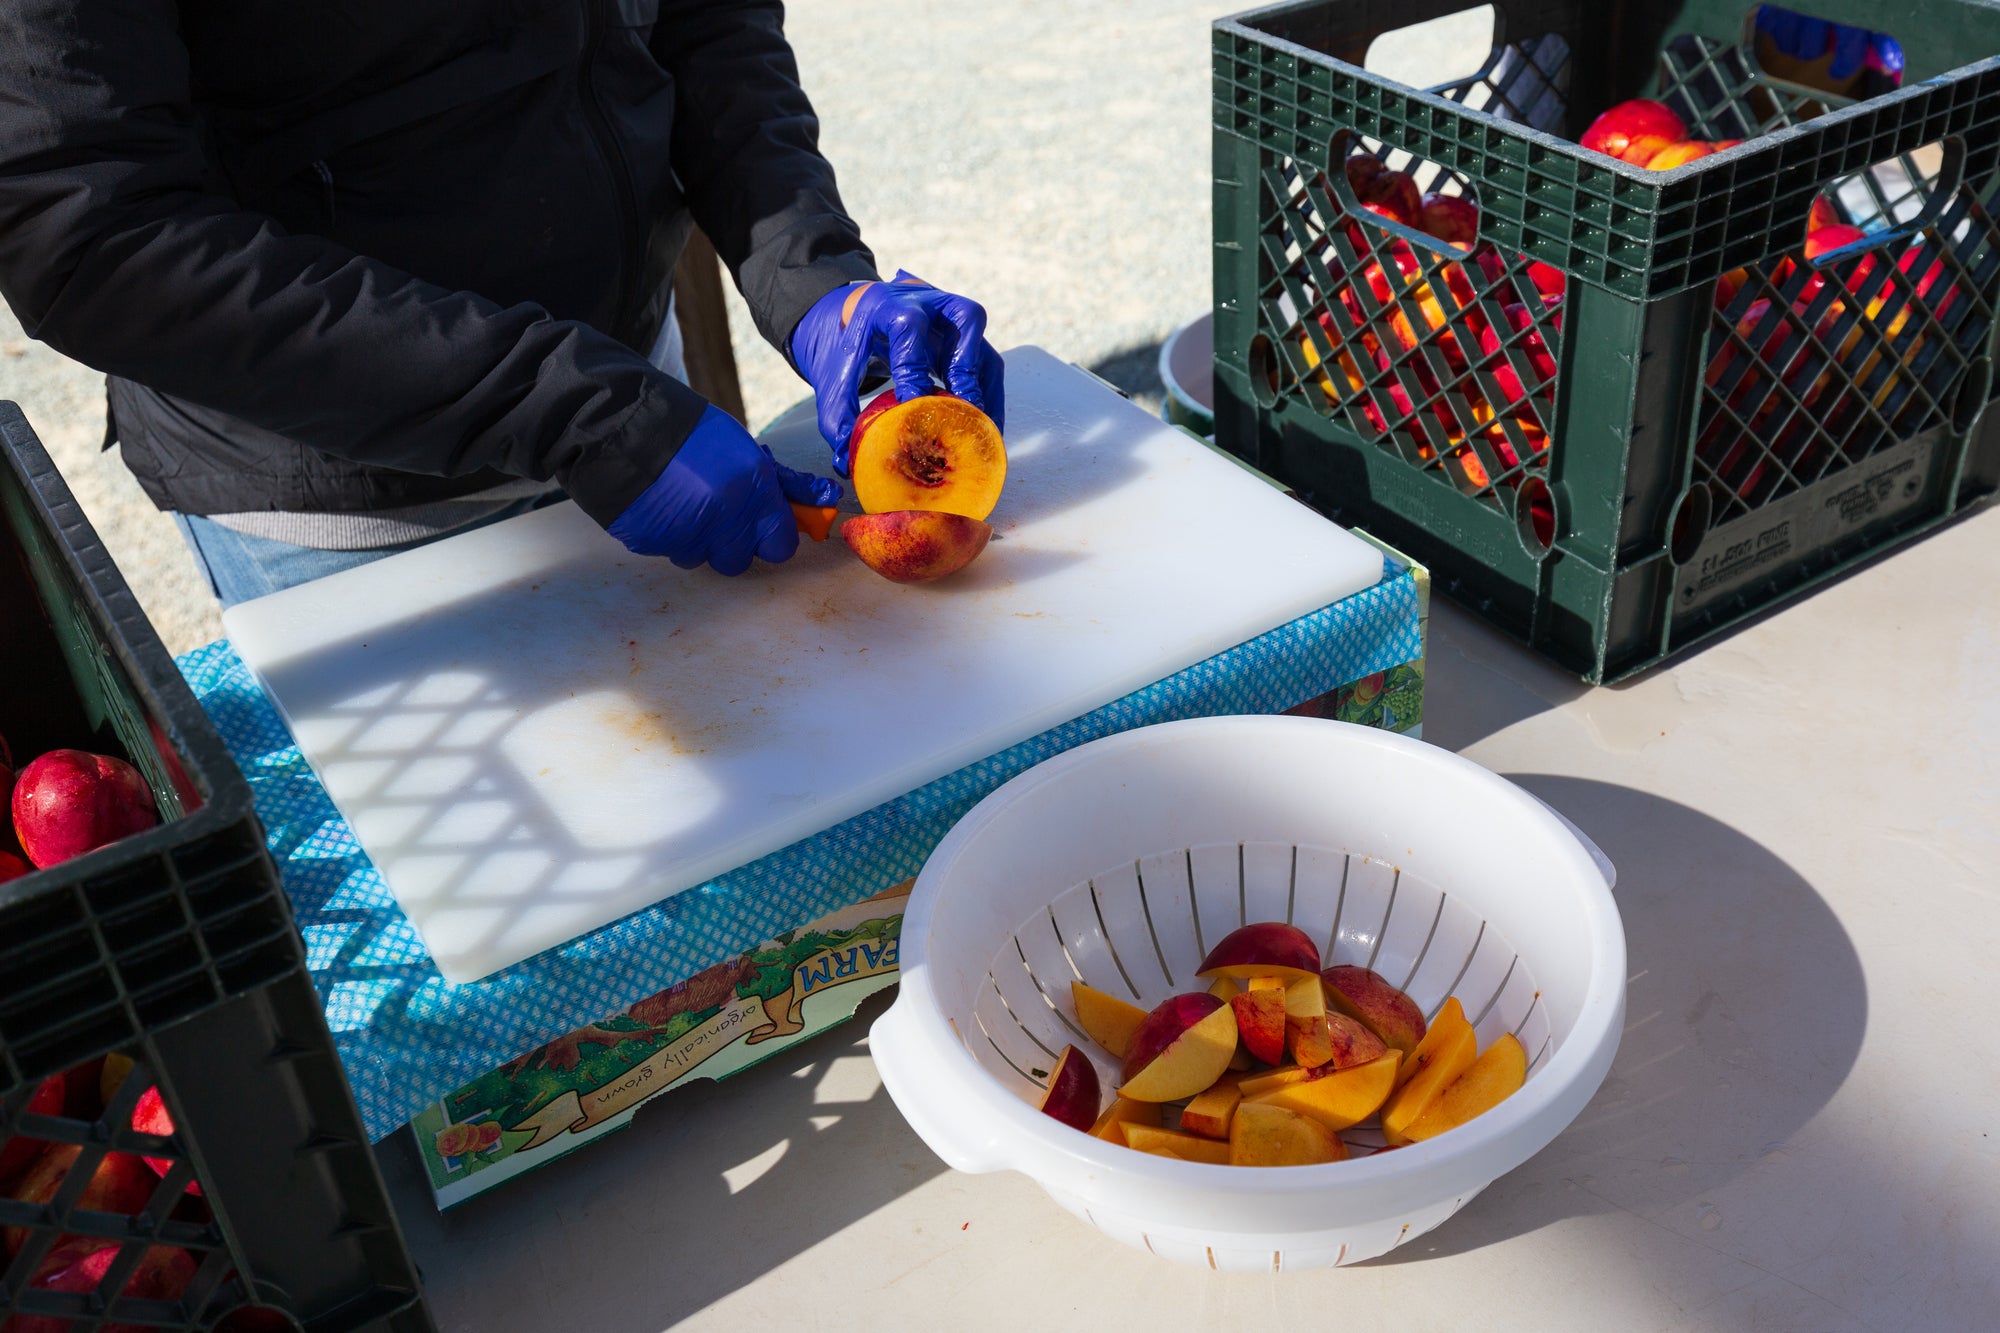 Dried Nectarines – Frog Hollow Farm